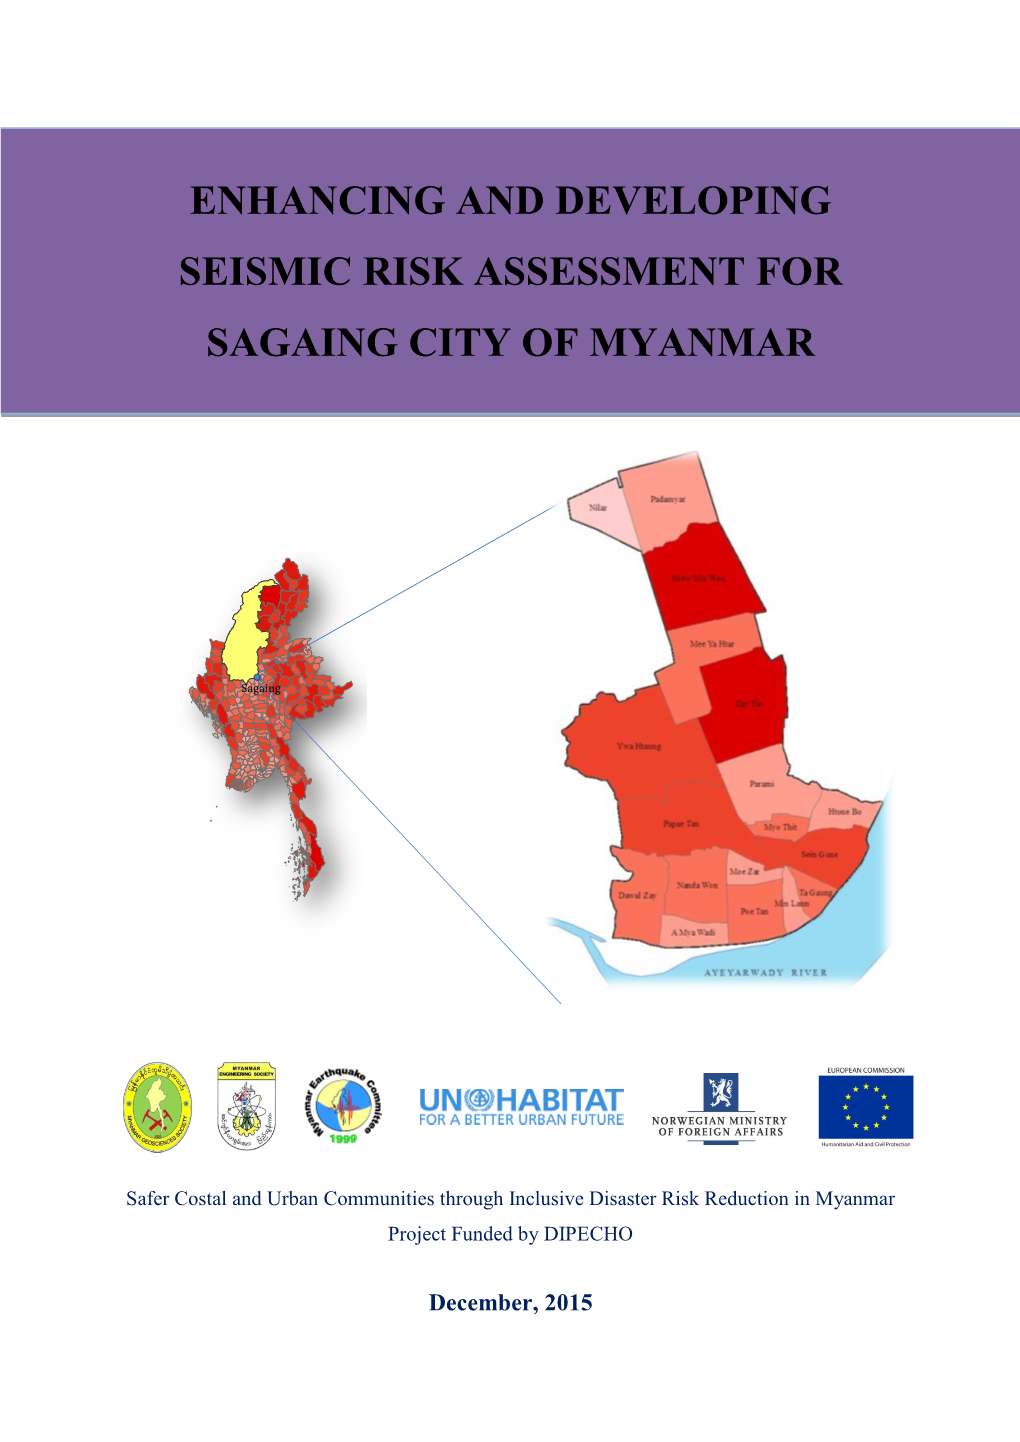 Enhancing and Developing Seismic Risk Assessment for Sagaing City of Myanmar